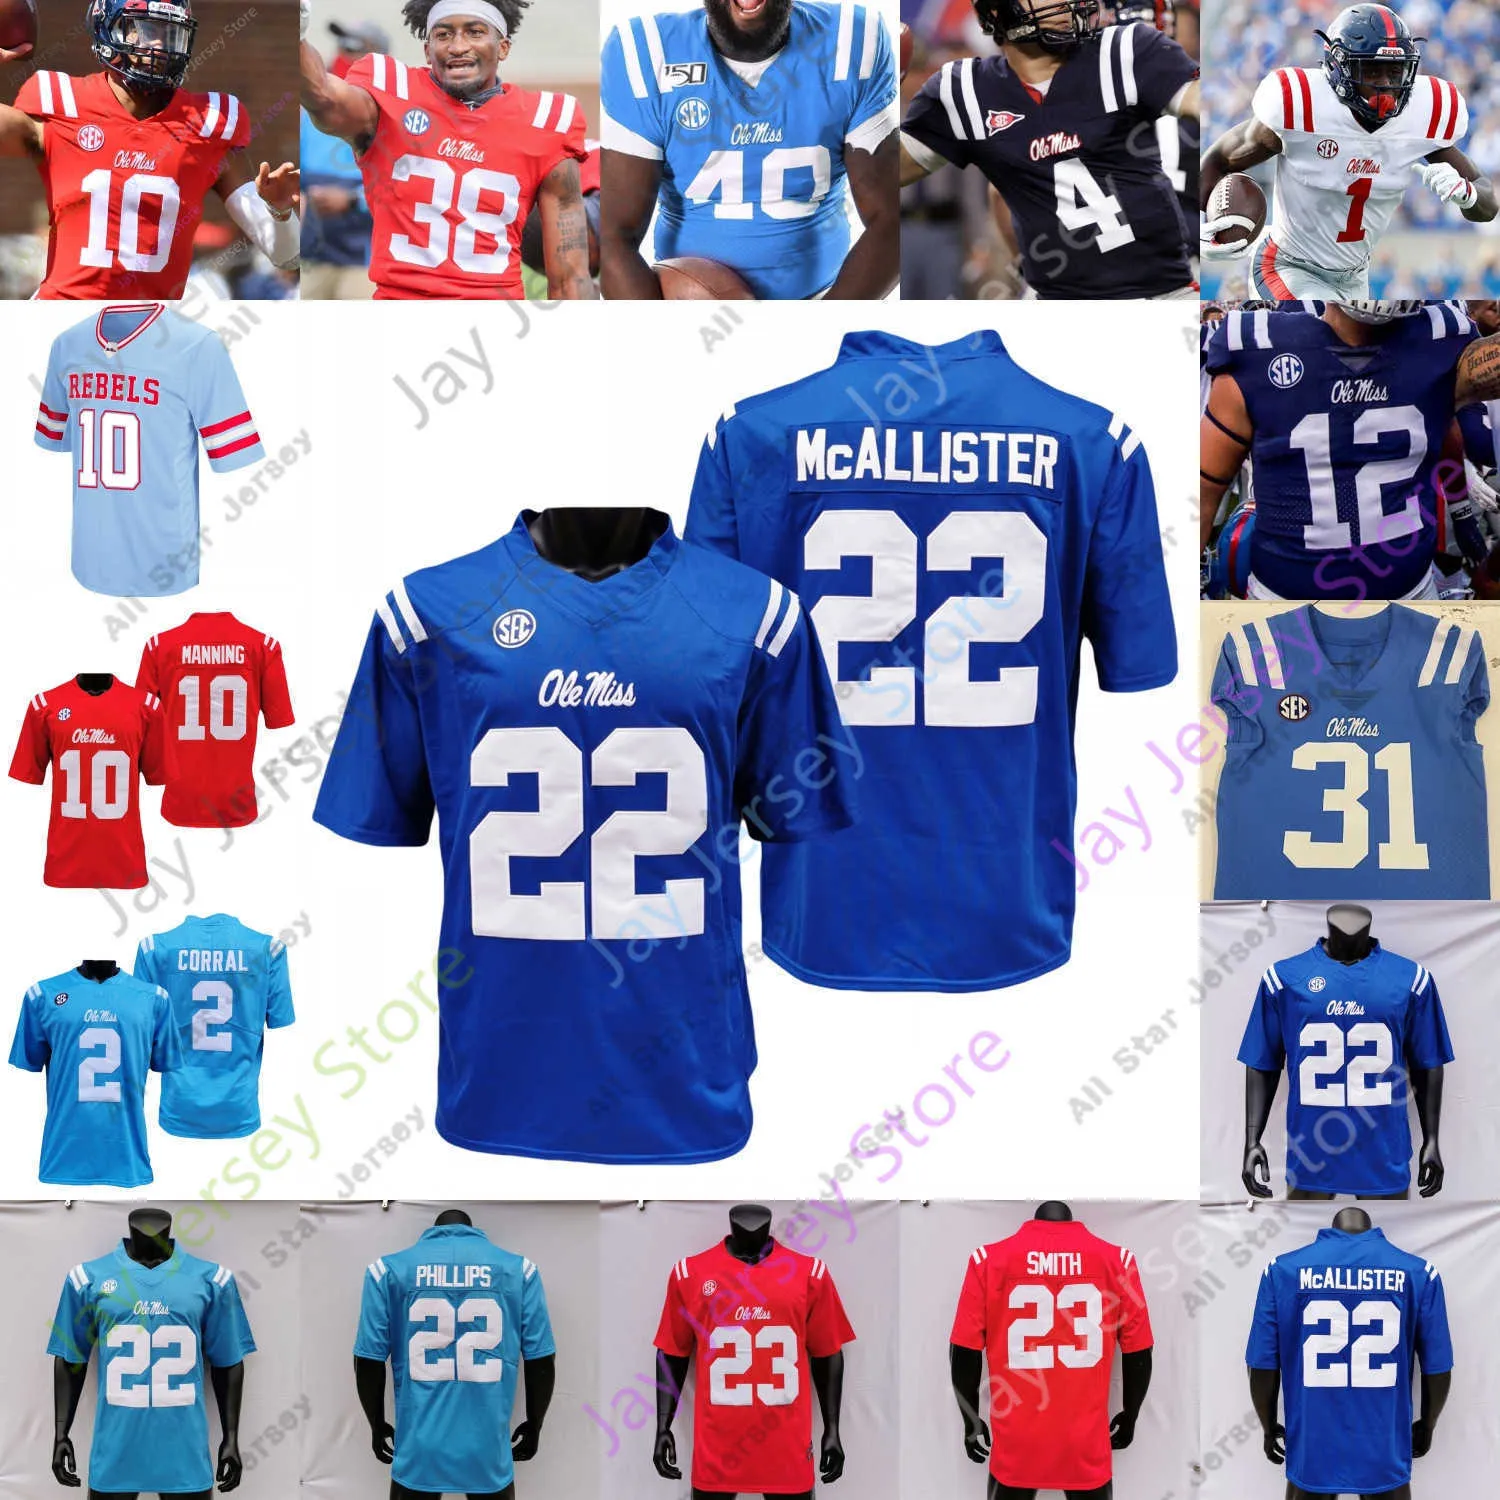 Ole Miss Rebels Football Jersey NCAA College A.J. Brown Ta'amu Archie Manning Mike Wallace Michael Oher Ealy Williams